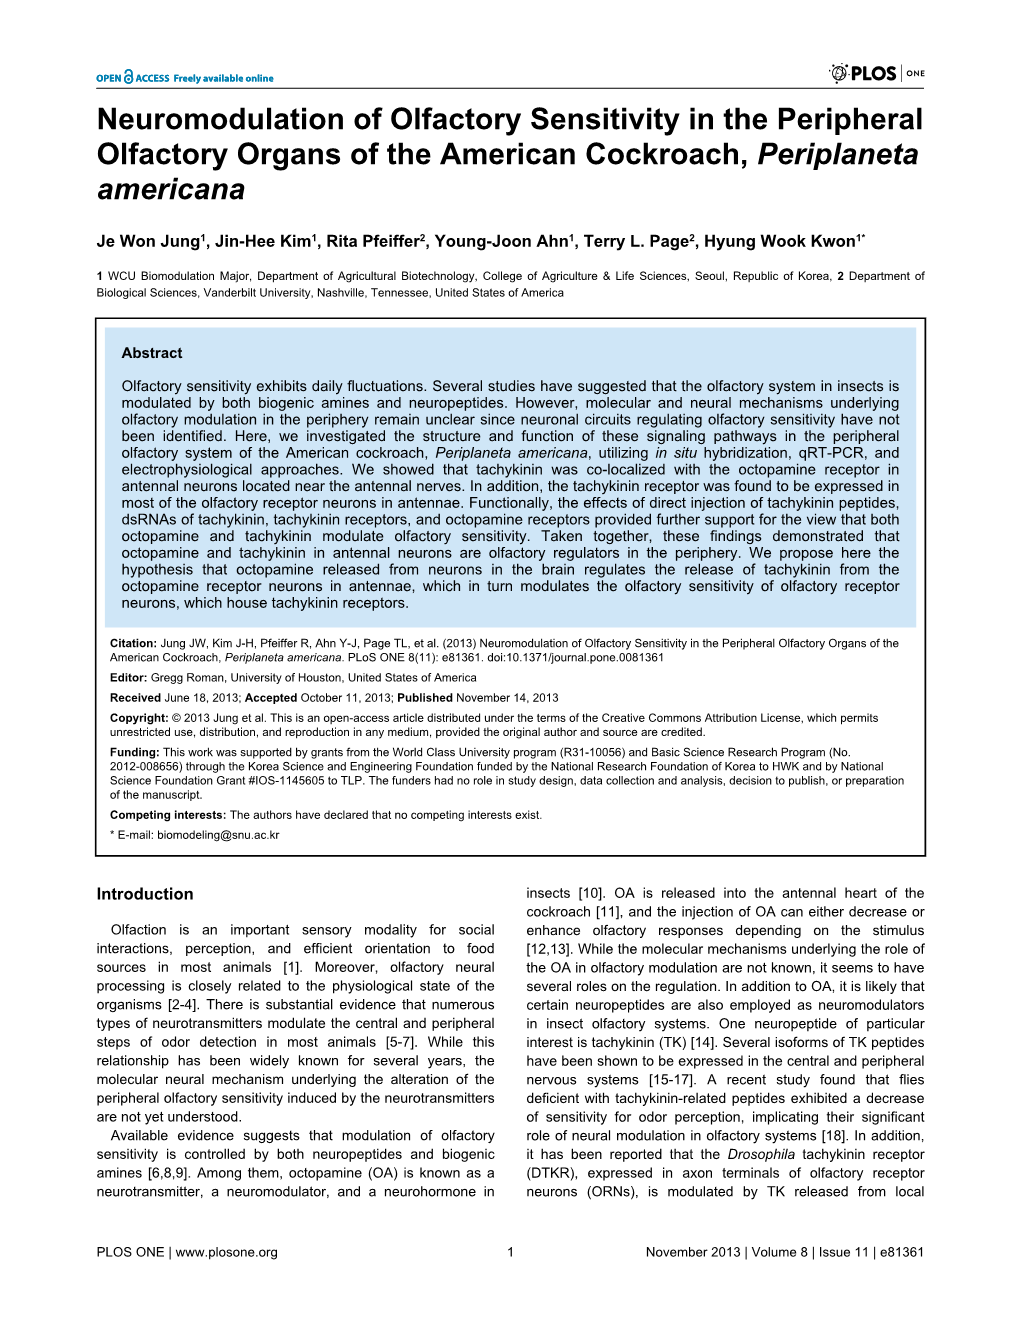 Neuromodulation of Olfactory Sensitivity in the Peripheral Olfactory Organs of the American Cockroach, Periplaneta Americana